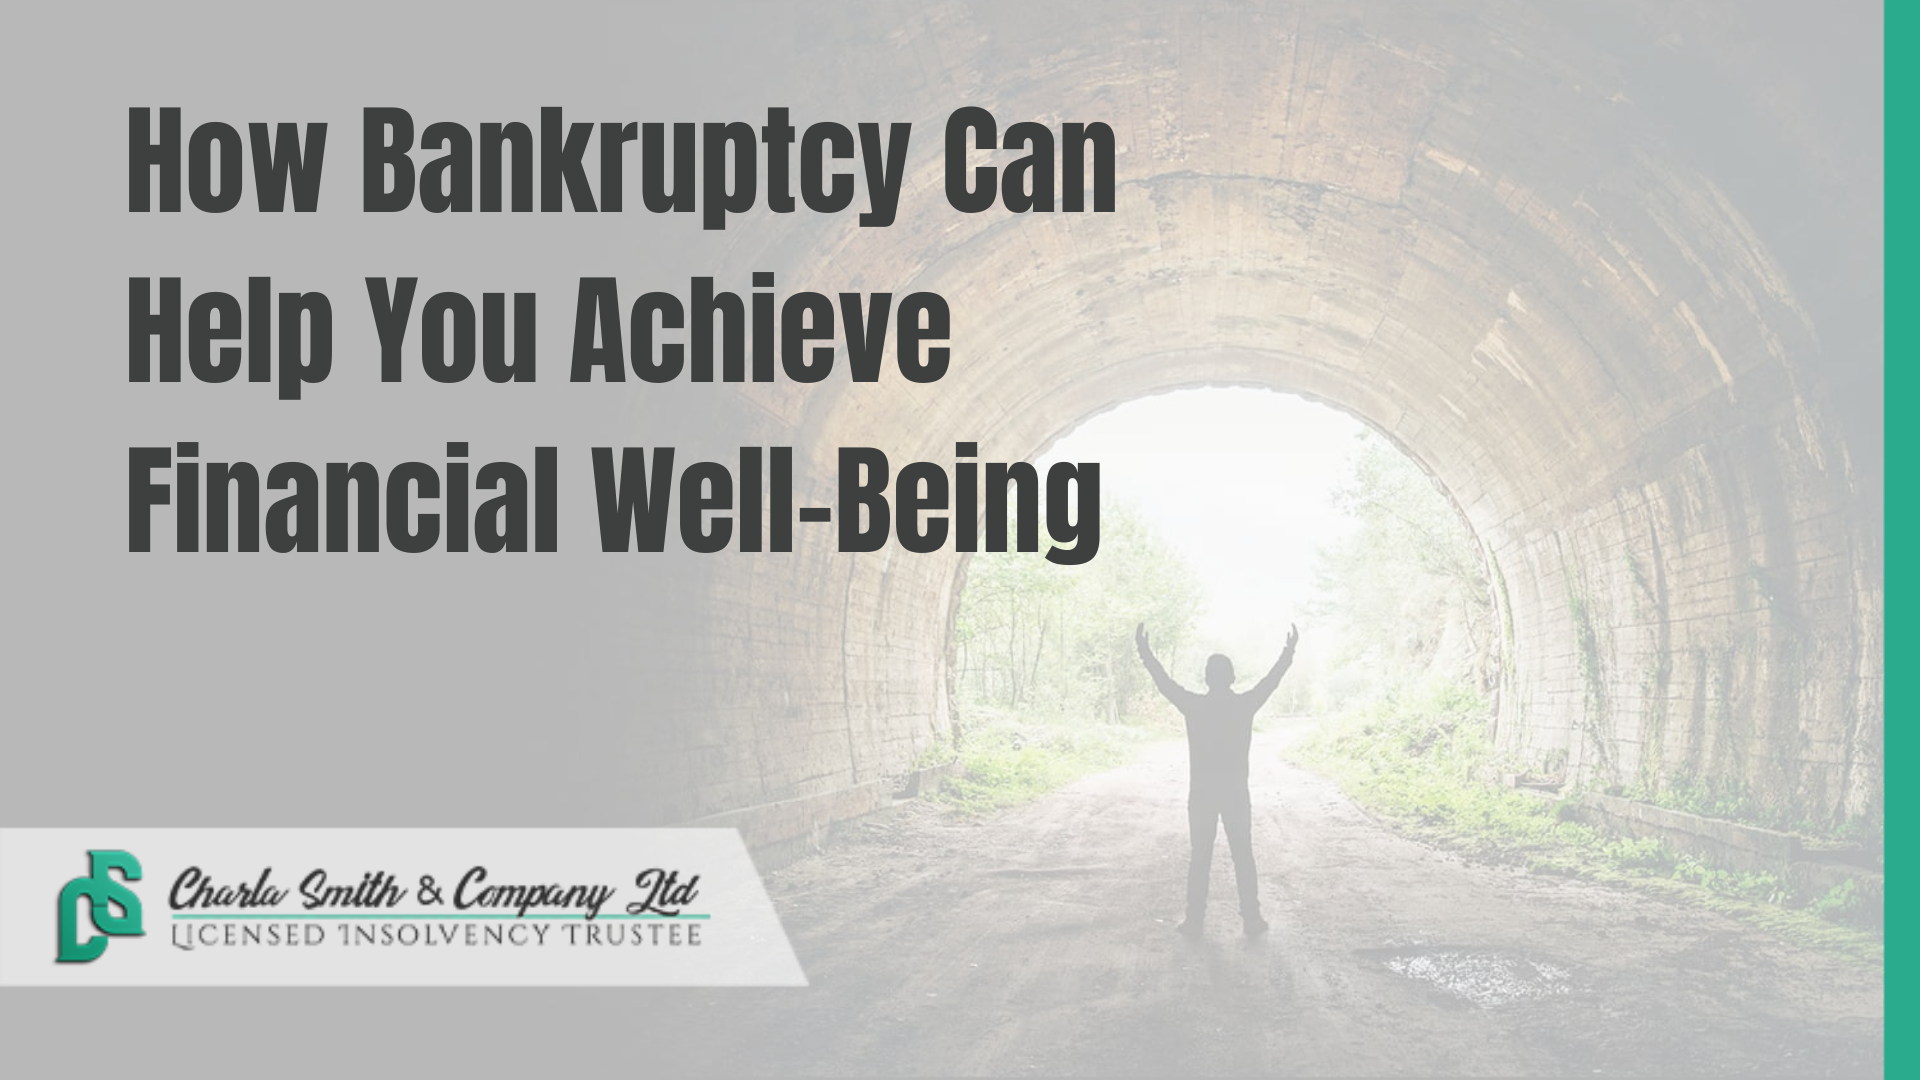 How Bankruptcy Can Help You Achieve Financial Well-Being